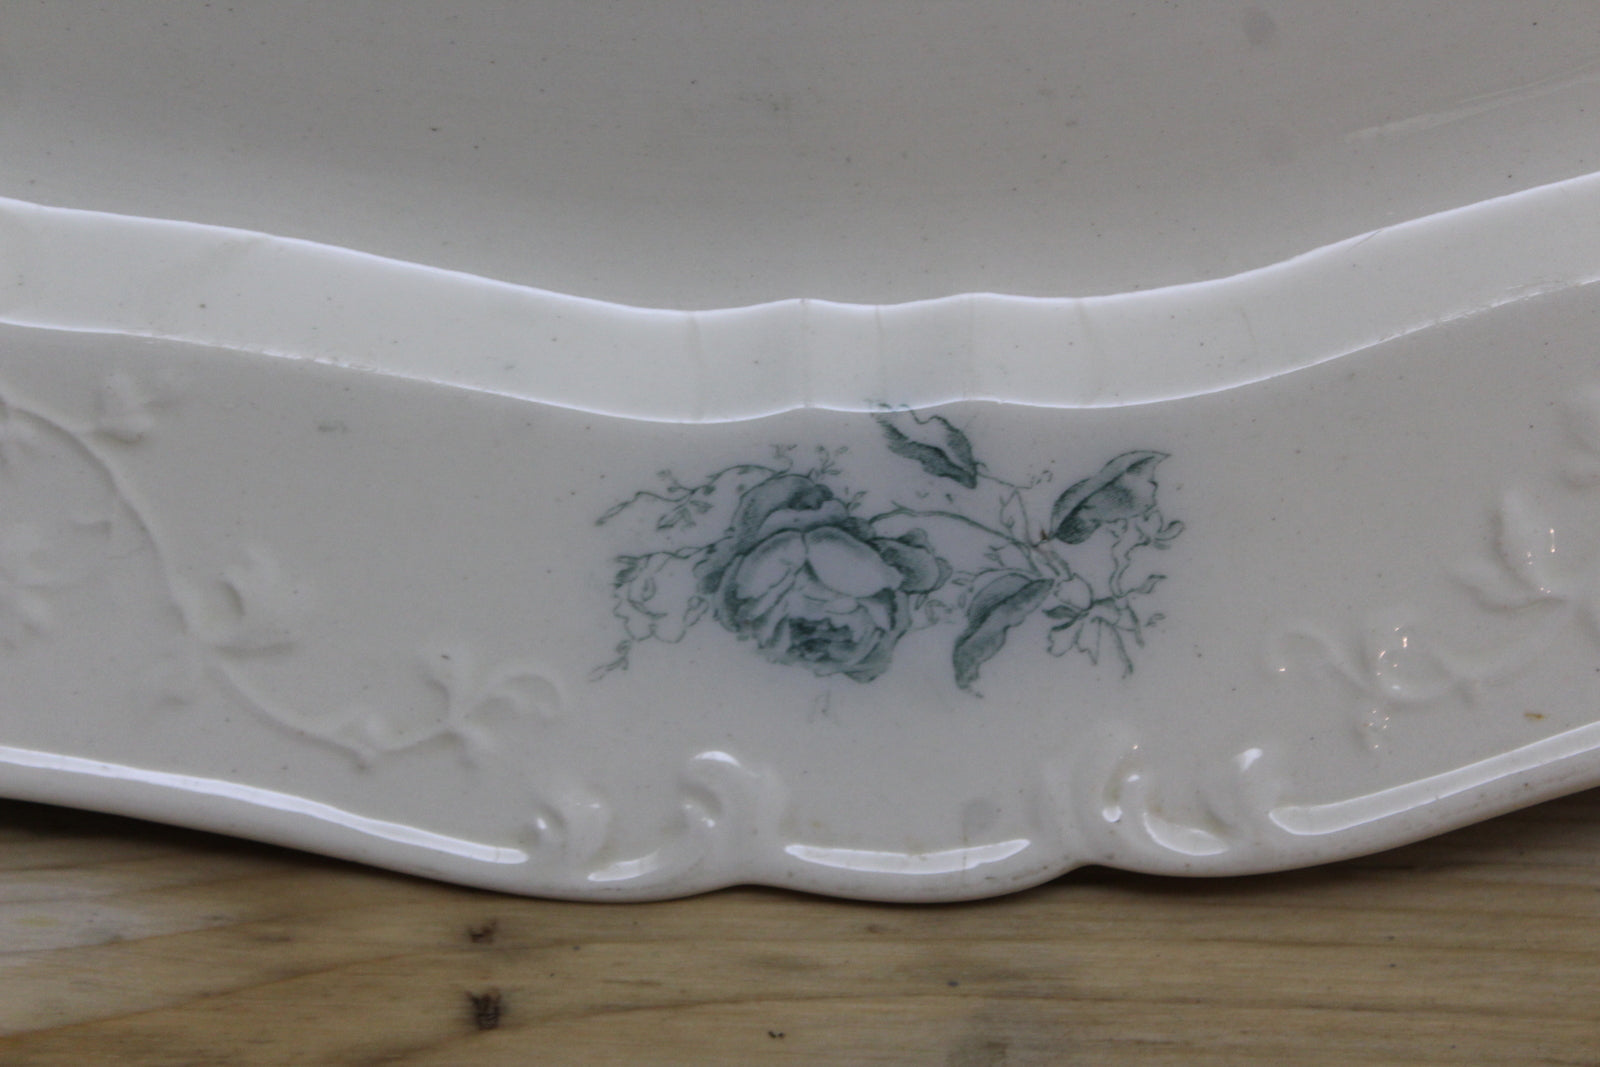 Victorian Blue & White Meat Plate - Kernow Furniture